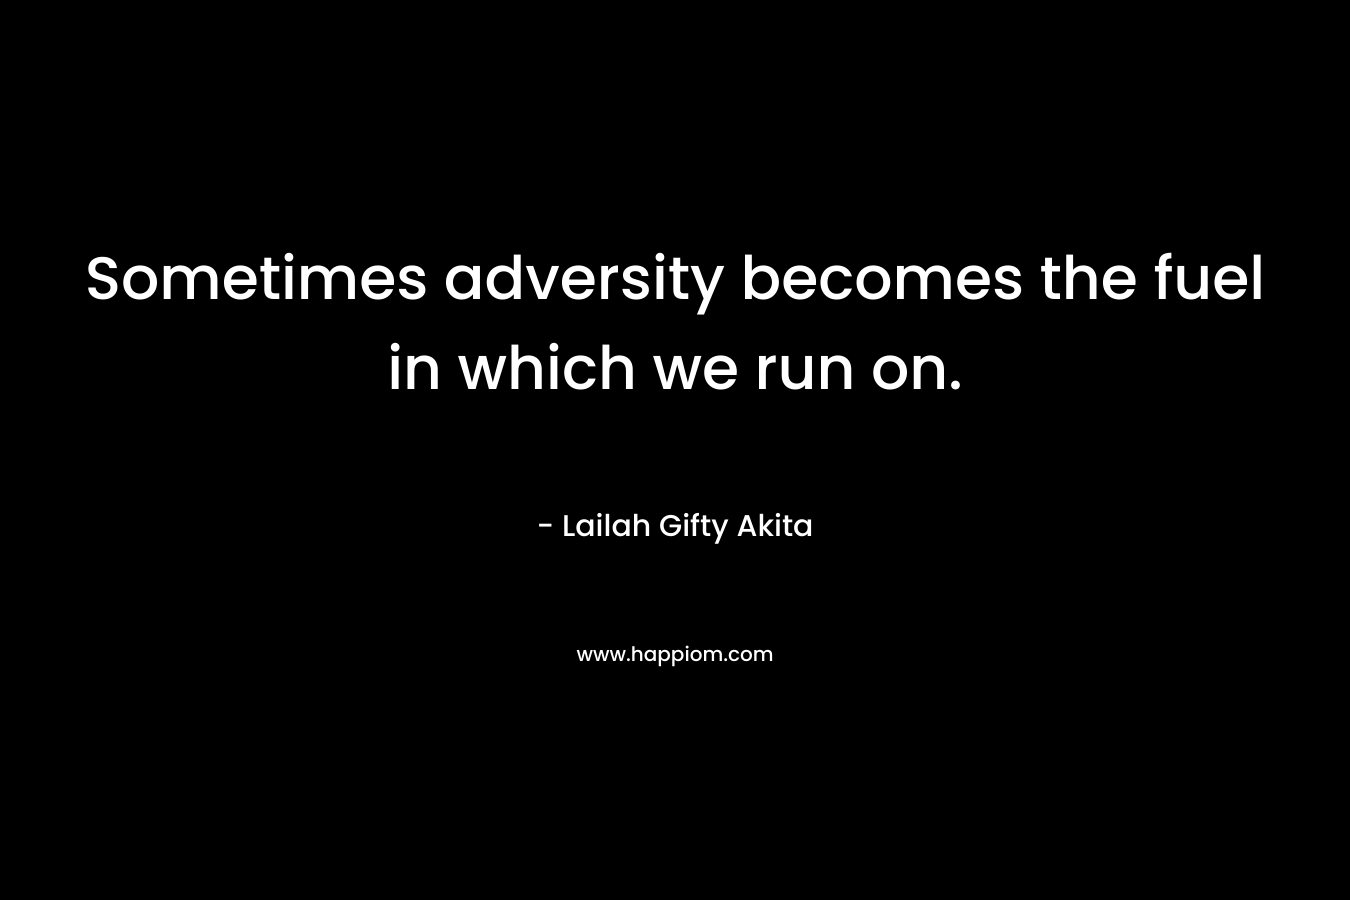 Sometimes adversity becomes the fuel in which we run on.